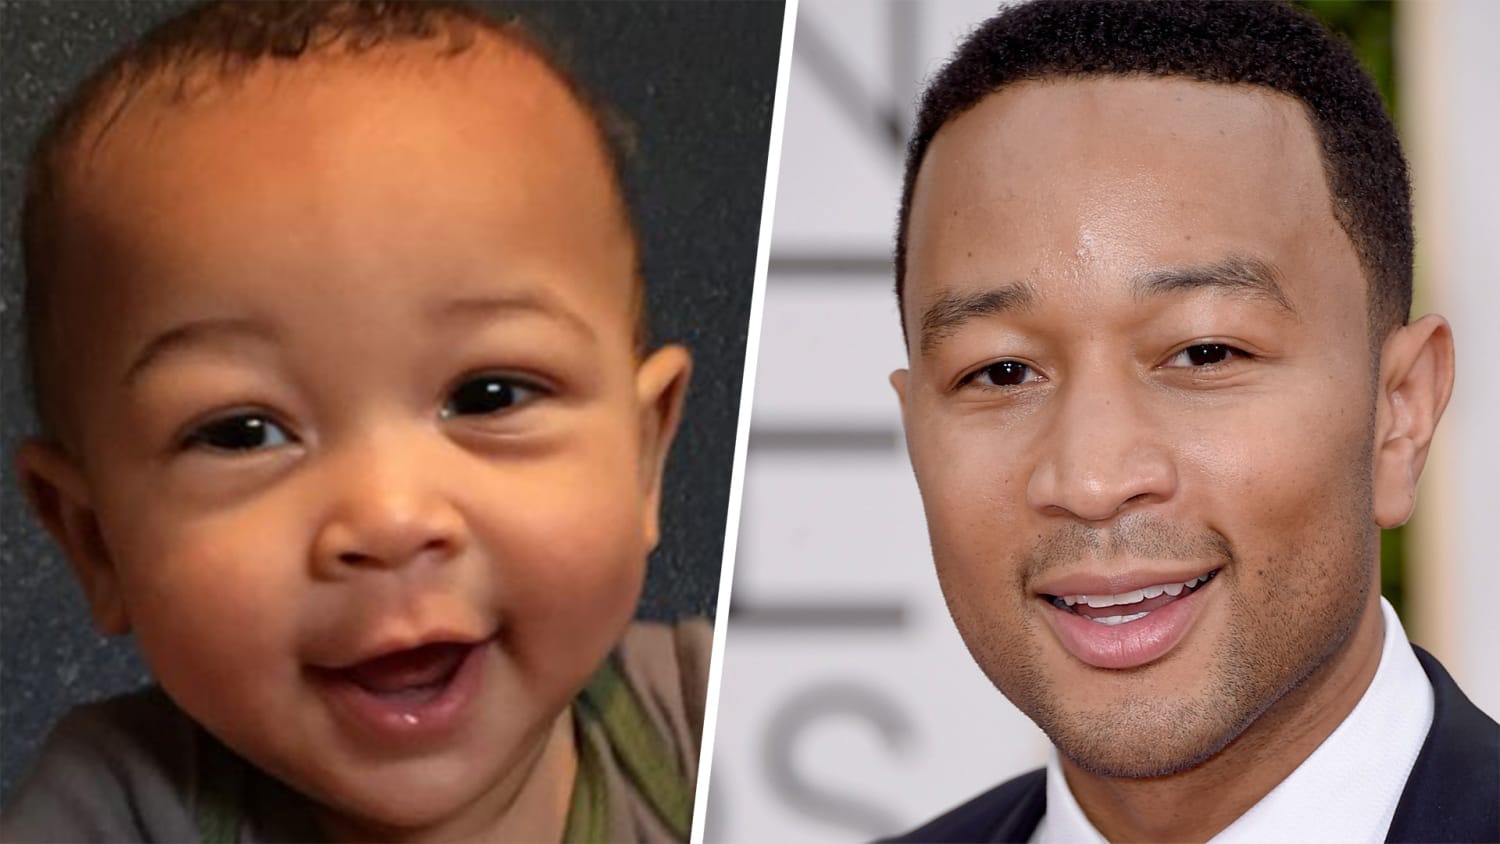 John Legend, Ed Sheeran and other stars with baby doppelgangers - TODAY.com1920 x 1080